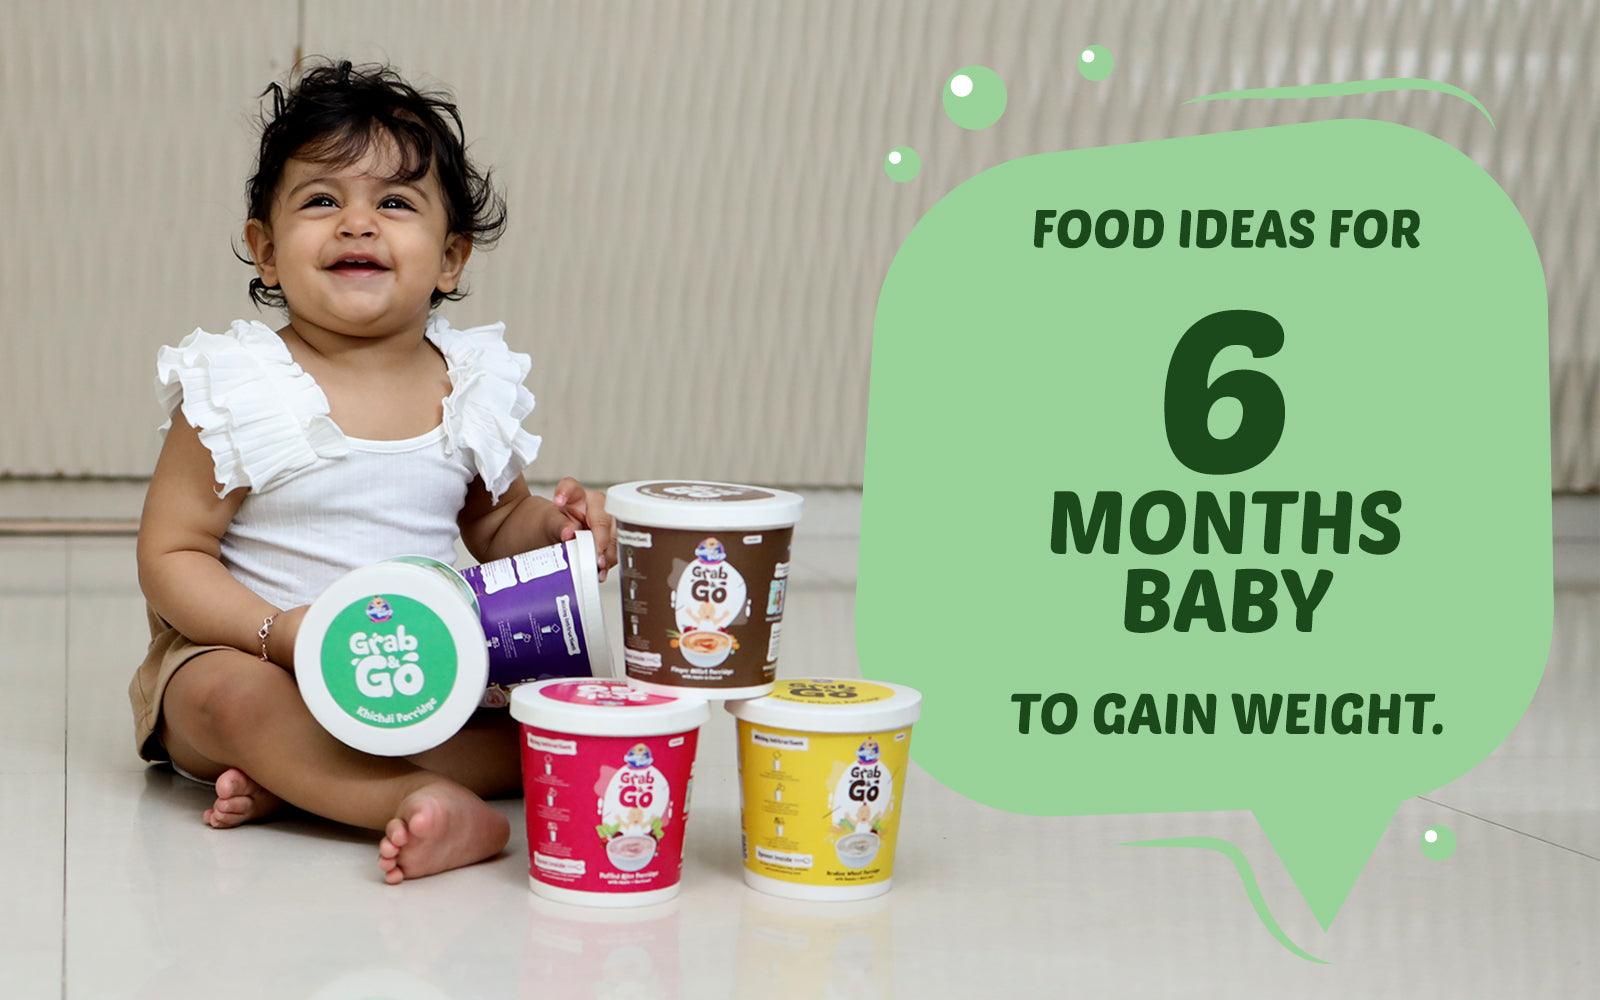 Food For 6 Month Baby To Gain Weight